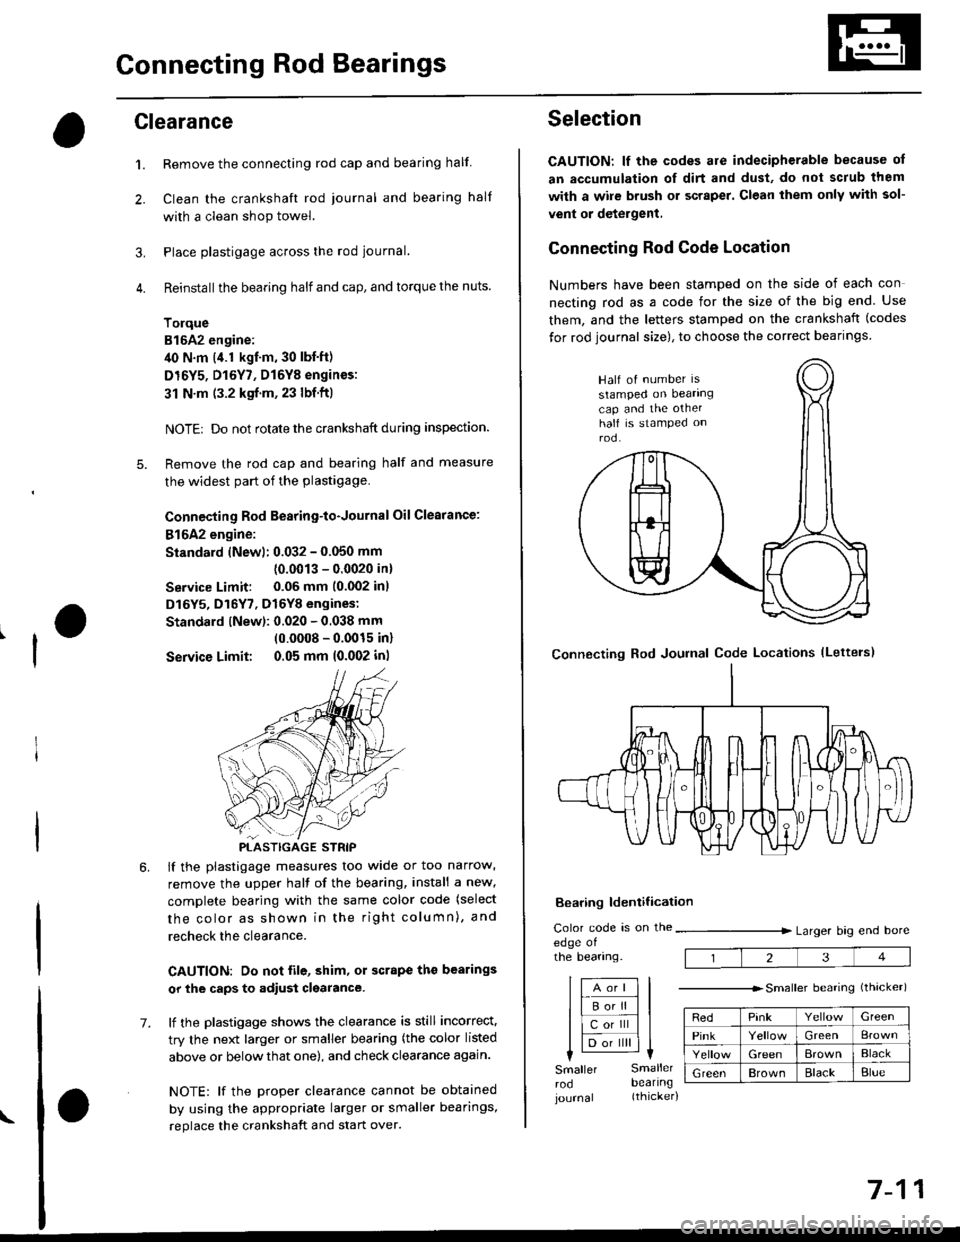 HONDA CIVIC 1999 6.G Owners Guide Connecting Rod Bearings
Clearance
Remove the connecting rod cap and bearing half
Clean the crankshaft rod iournal and bearing half
with a clean shop towel.
Place plastigage across the rod journal.
Rei